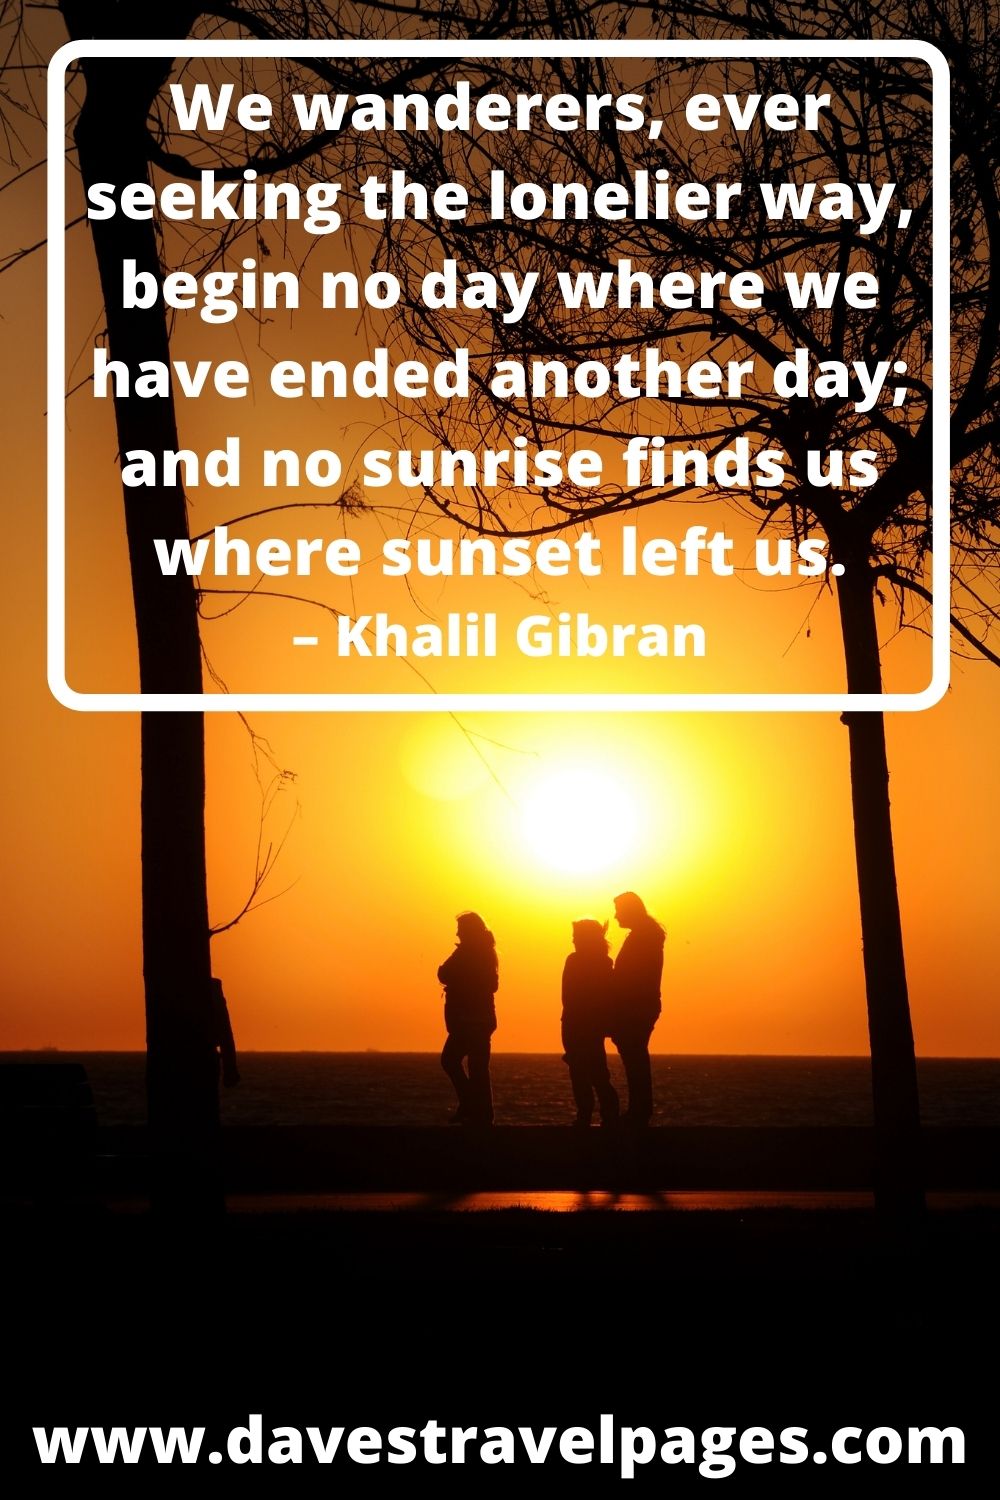 We wanderers, ever seeking the lonelier way, begin no day where we have ended another day; and no sunrise finds us where sunset left us. – Khalil Gibran